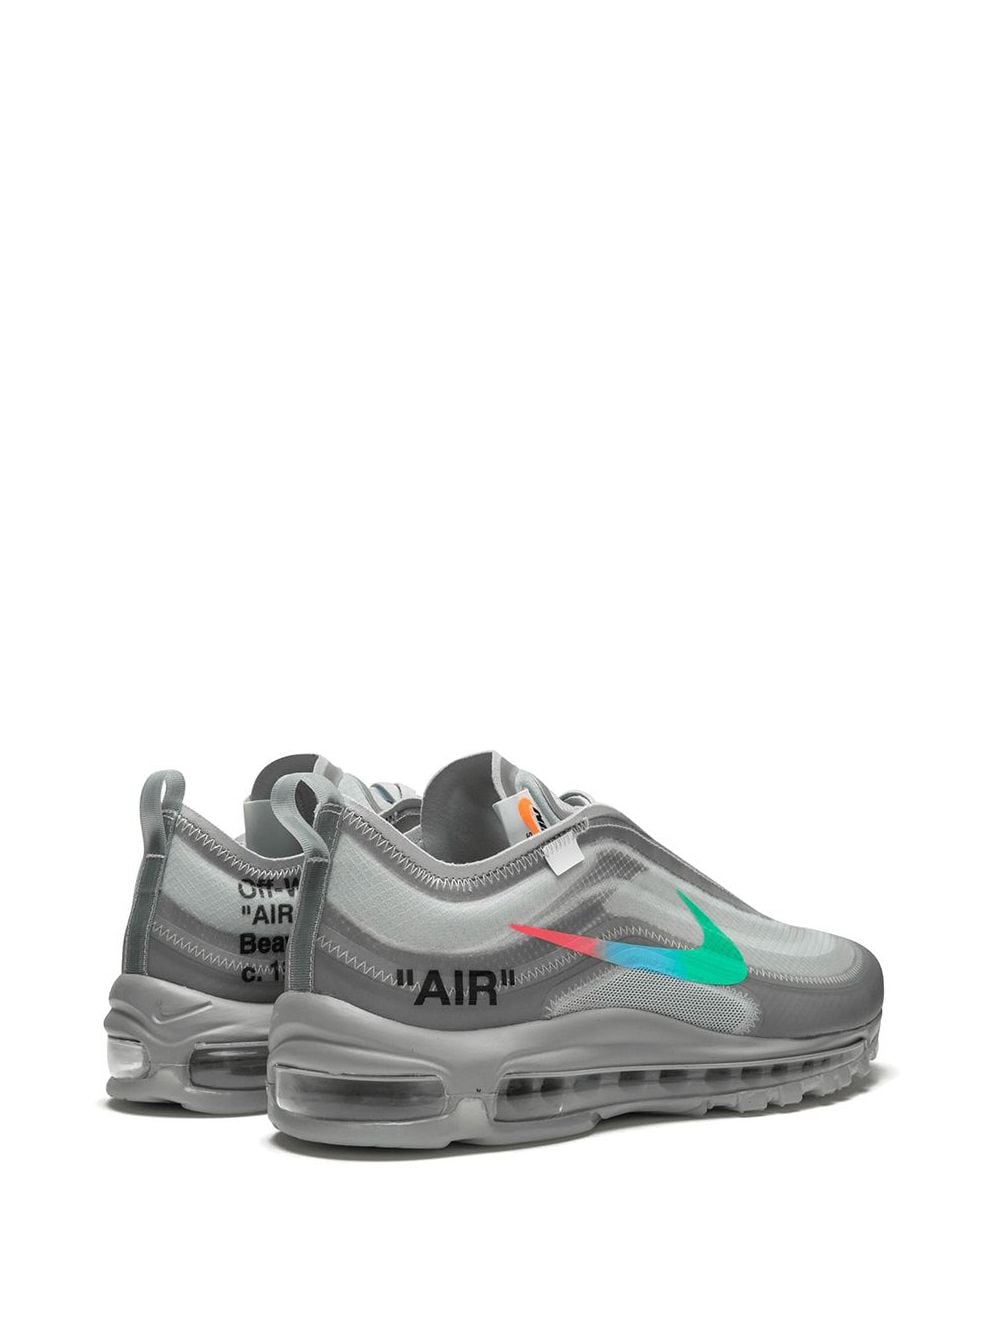 Nike X Off-White The 10th: Air Max 97 OG sneakers